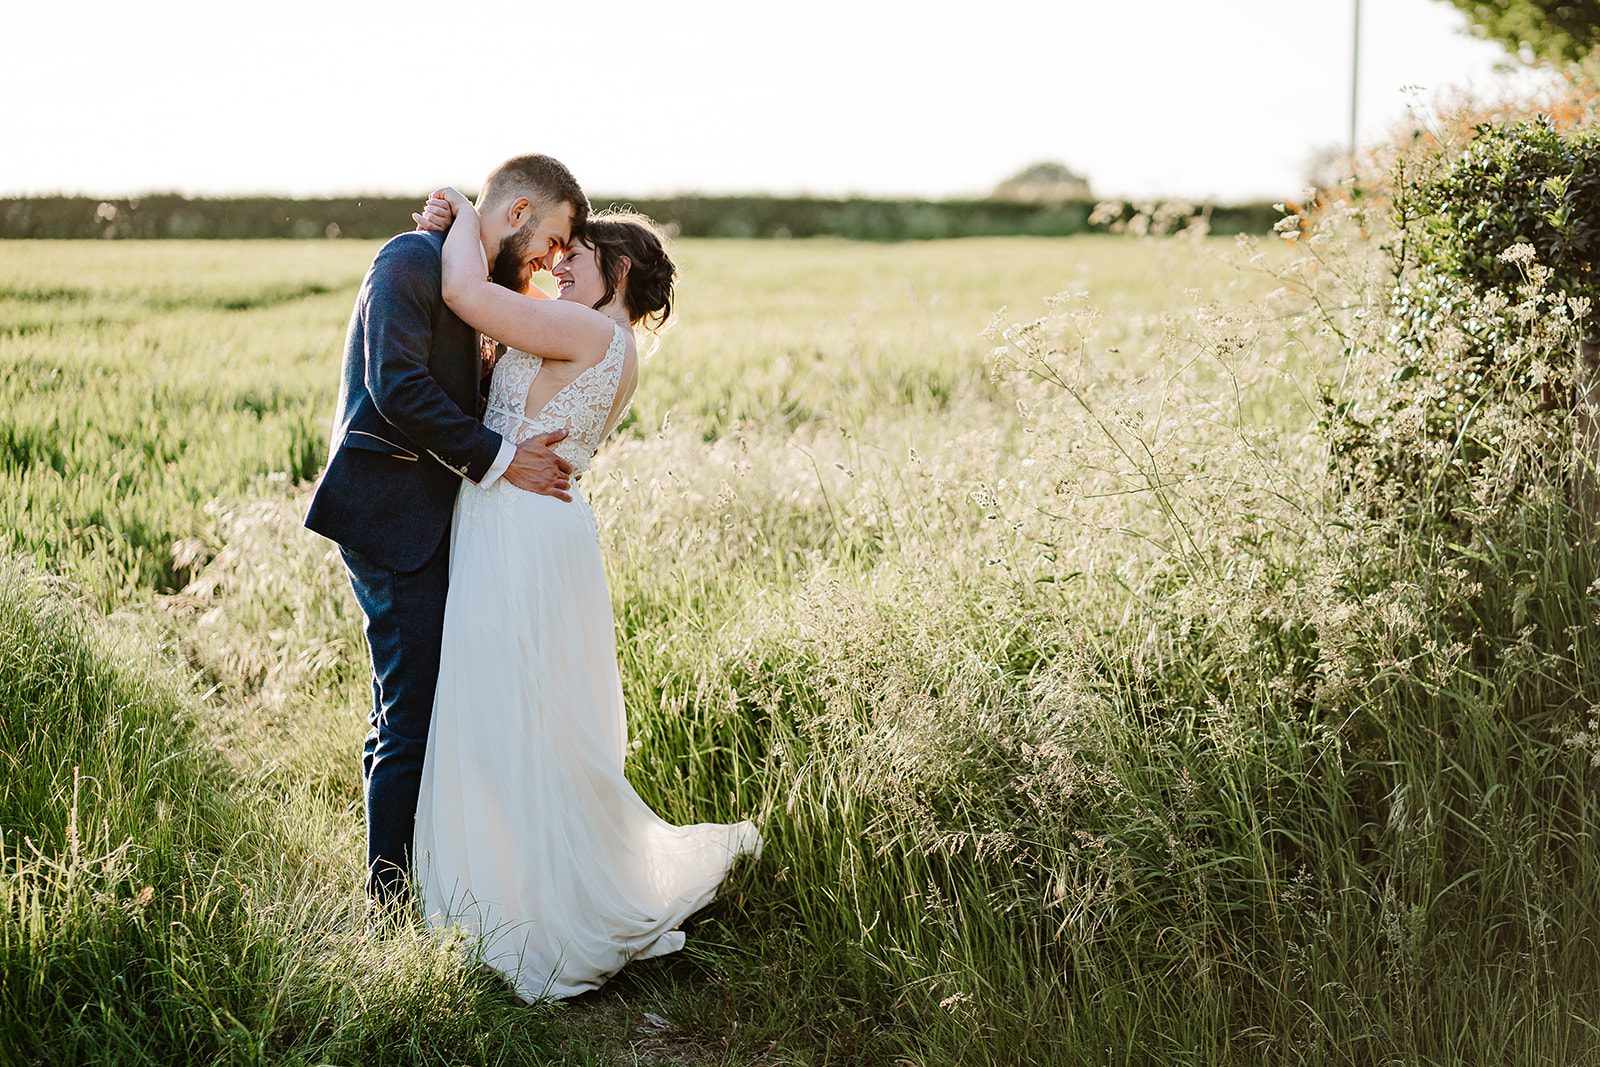 A bride and groom embrace in a sunlit field near Larkspur Lodge Wedding Venue in Knutsford